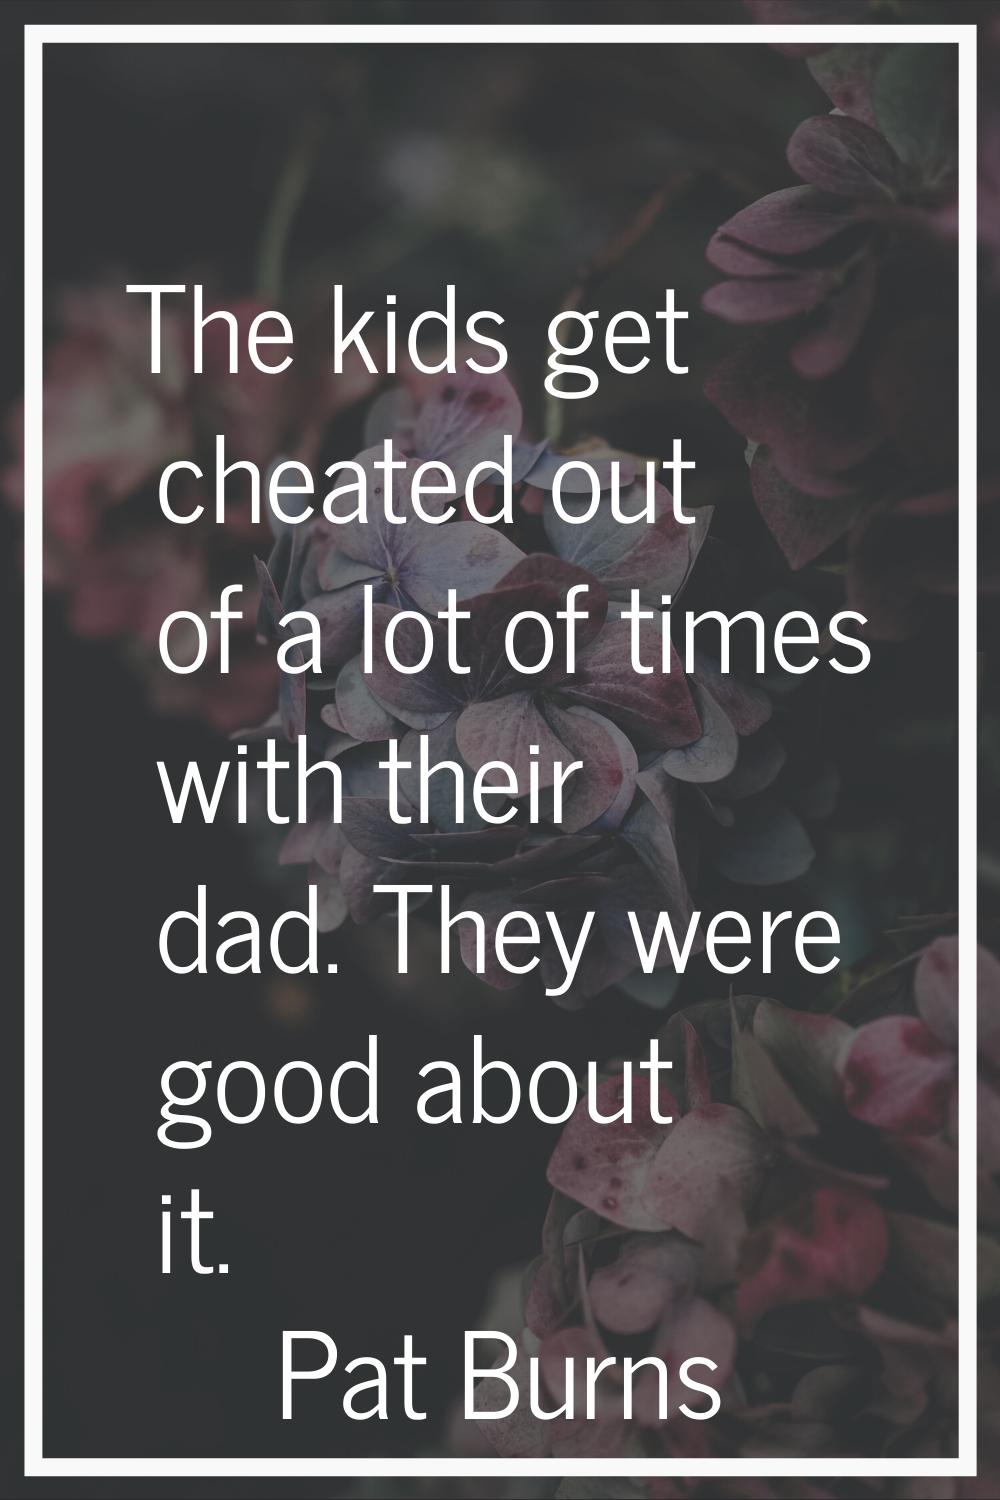 The kids get cheated out of a lot of times with their dad. They were good about it.